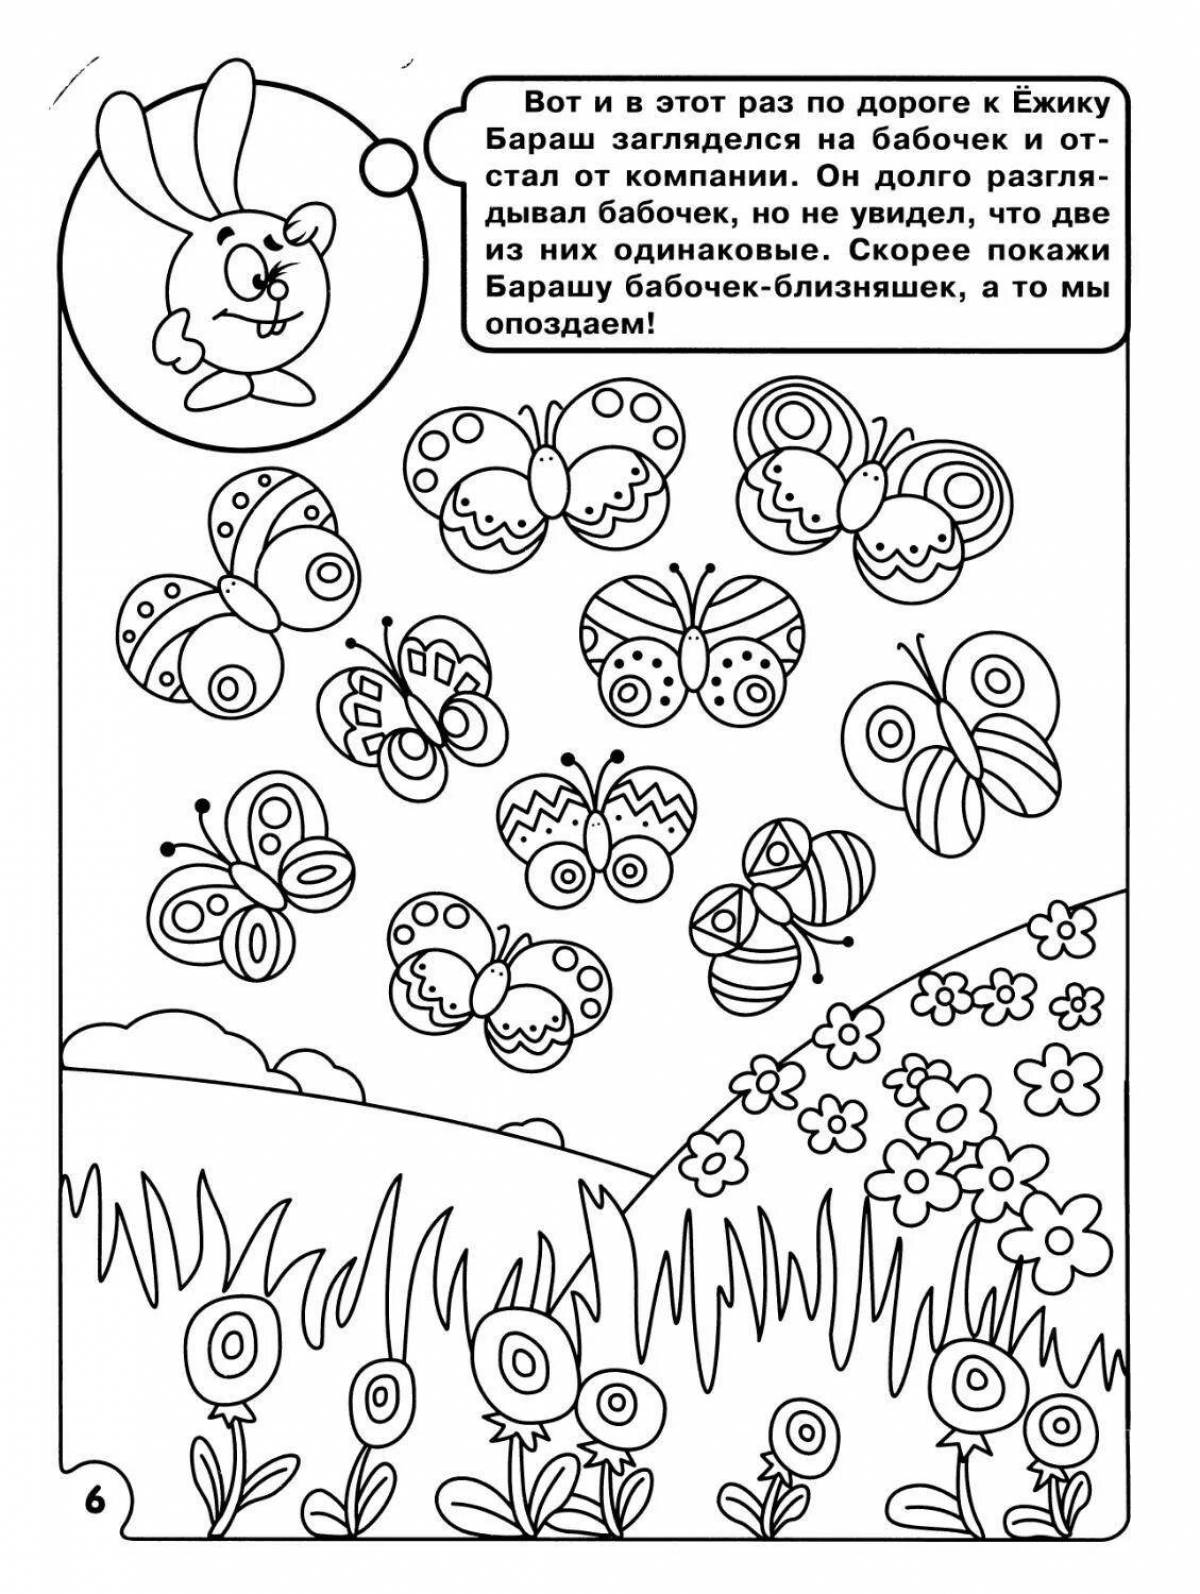 Fun coloring book smart for 6 year olds